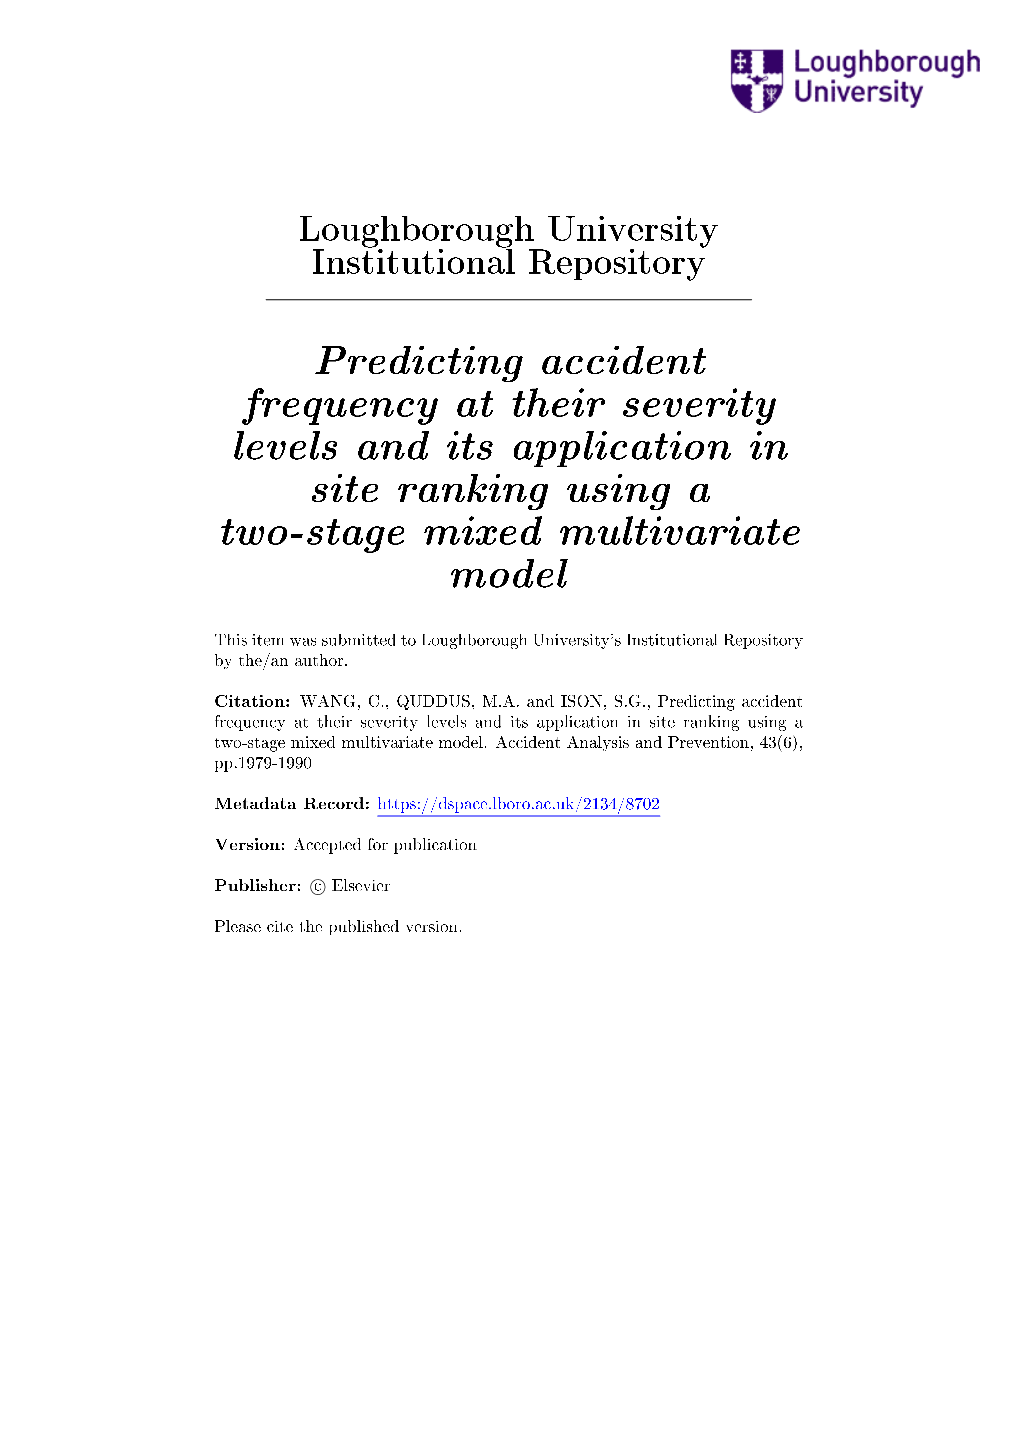 Predicting Accident Frequency at Their Severity Levels and Its Application in Site Ranking Using a Two-Stage Mixed Multivariate Model